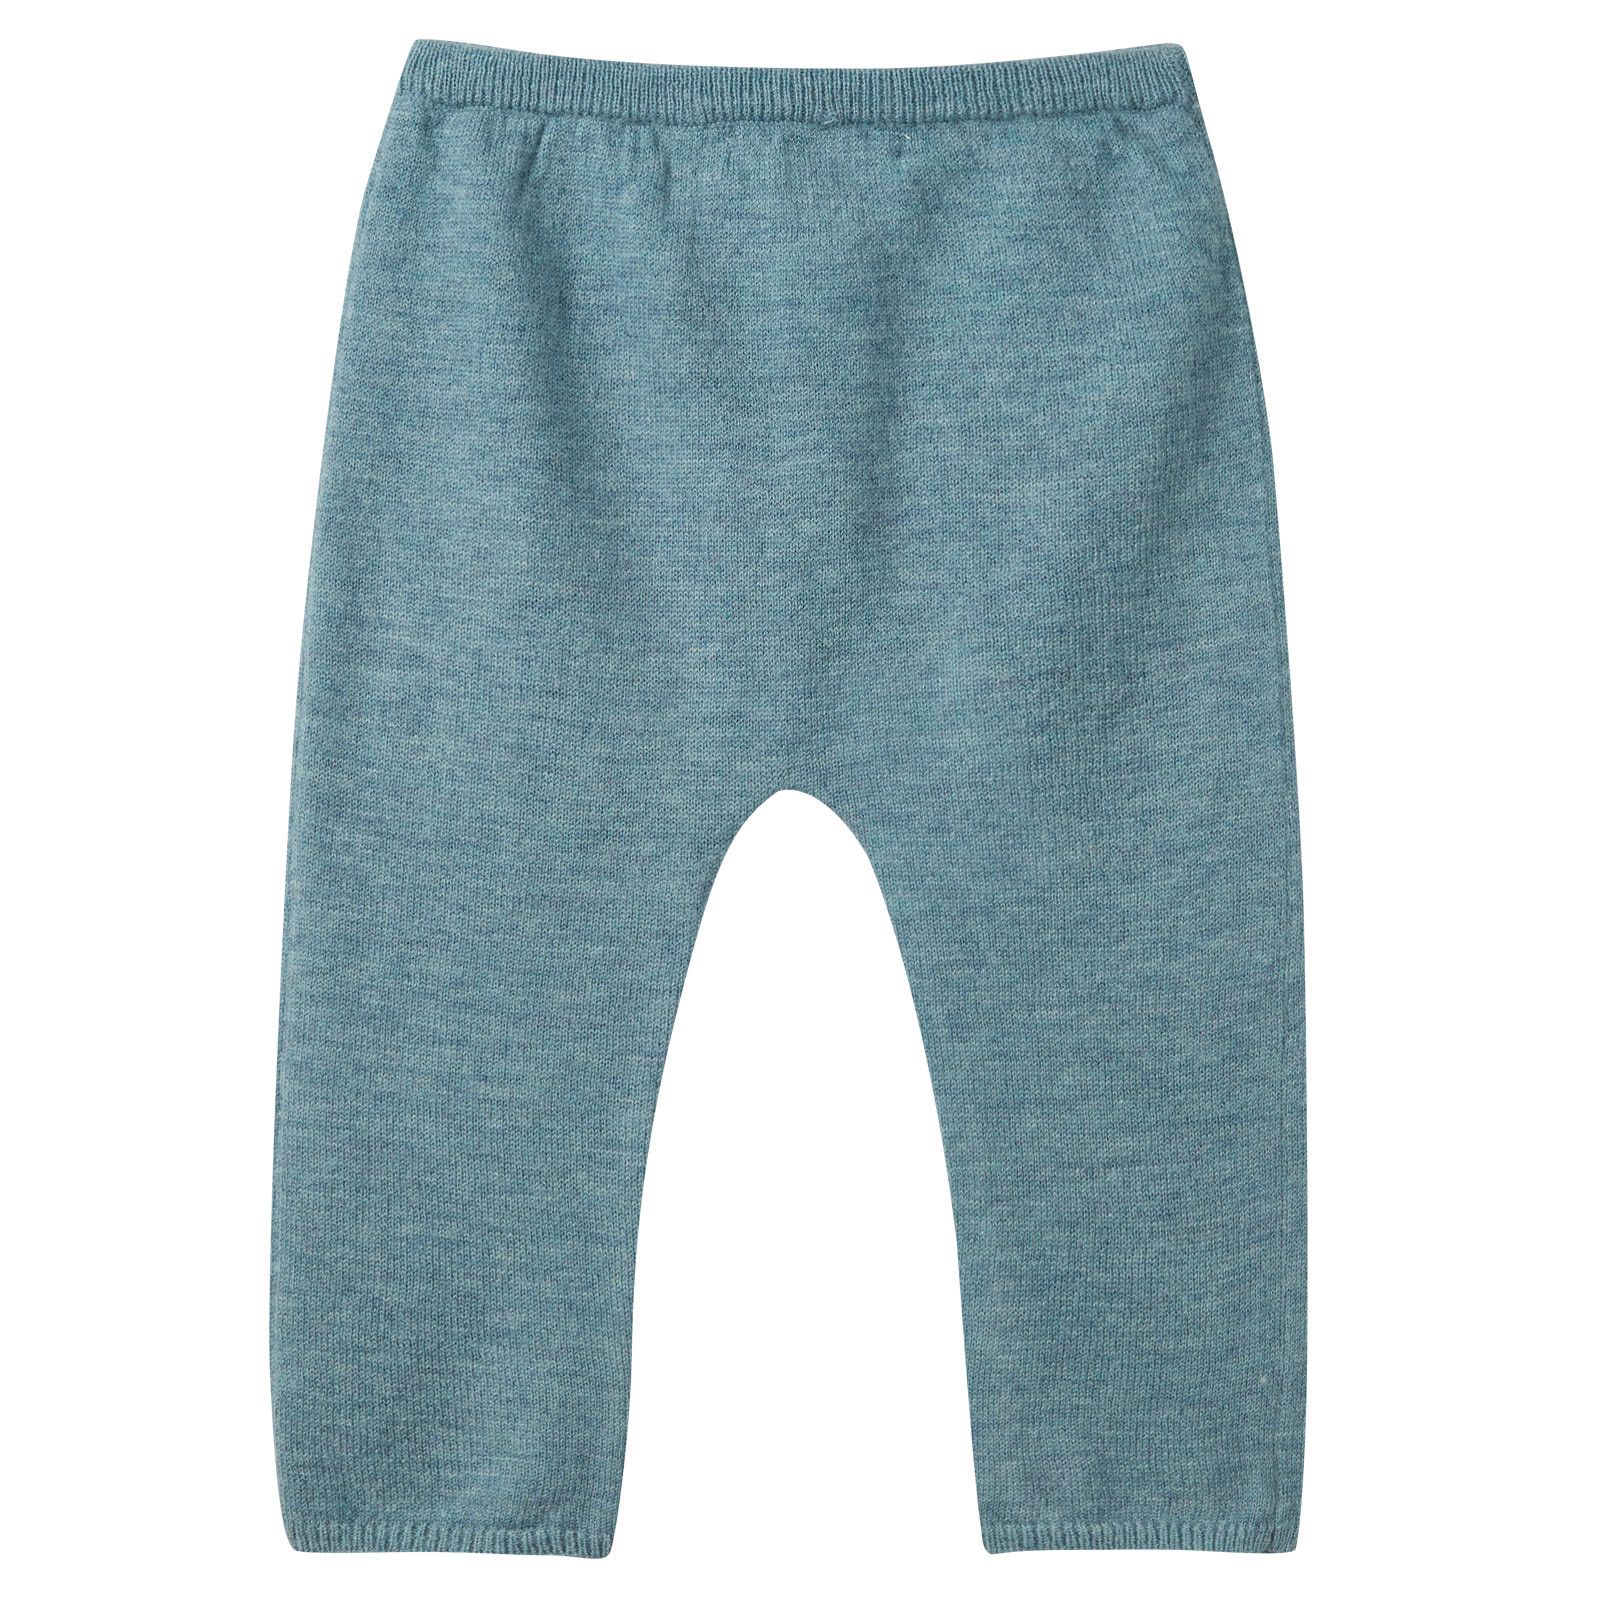 Baby Girls Misty Blue Knitted Legging With Bow Trims - CÉMAROSE | Children's Fashion Store - 2